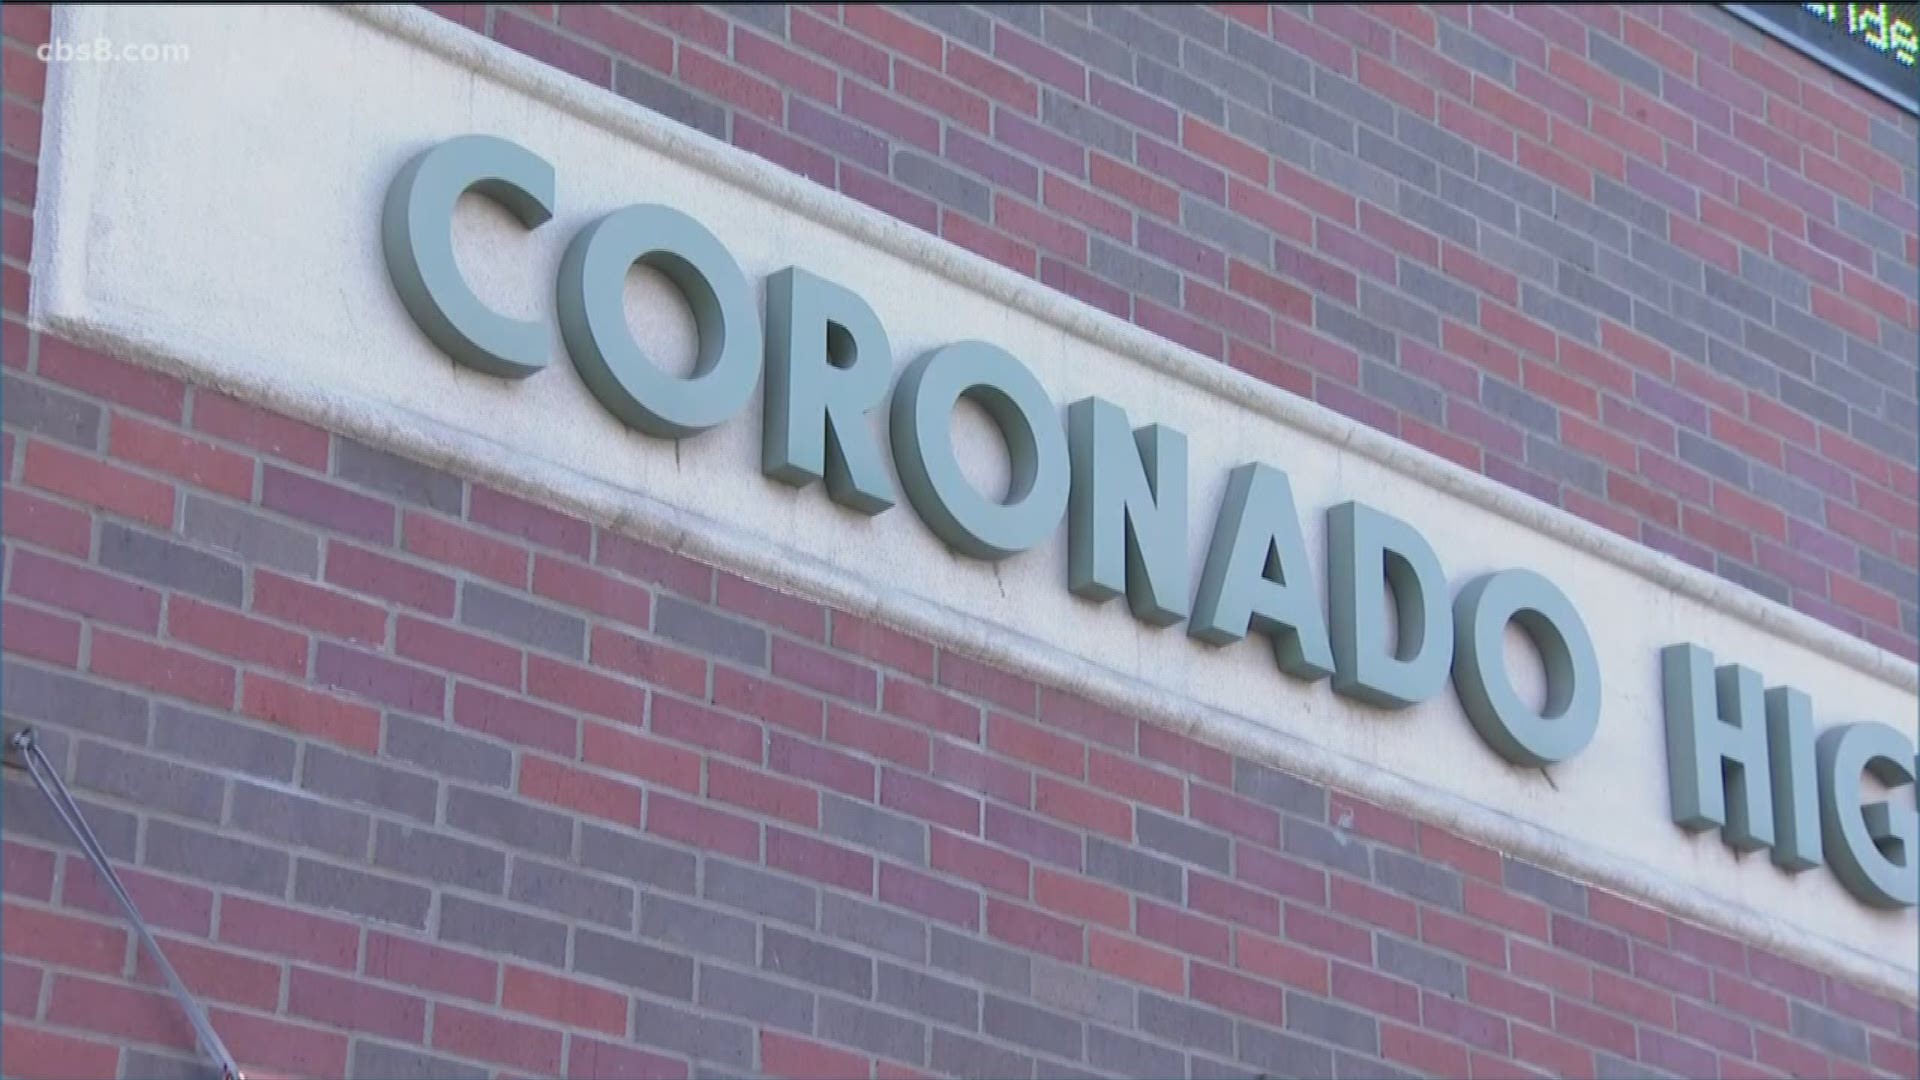 A 34-year-old man is accused of having an inappropriate, sexual relationship with a Coronado High student.